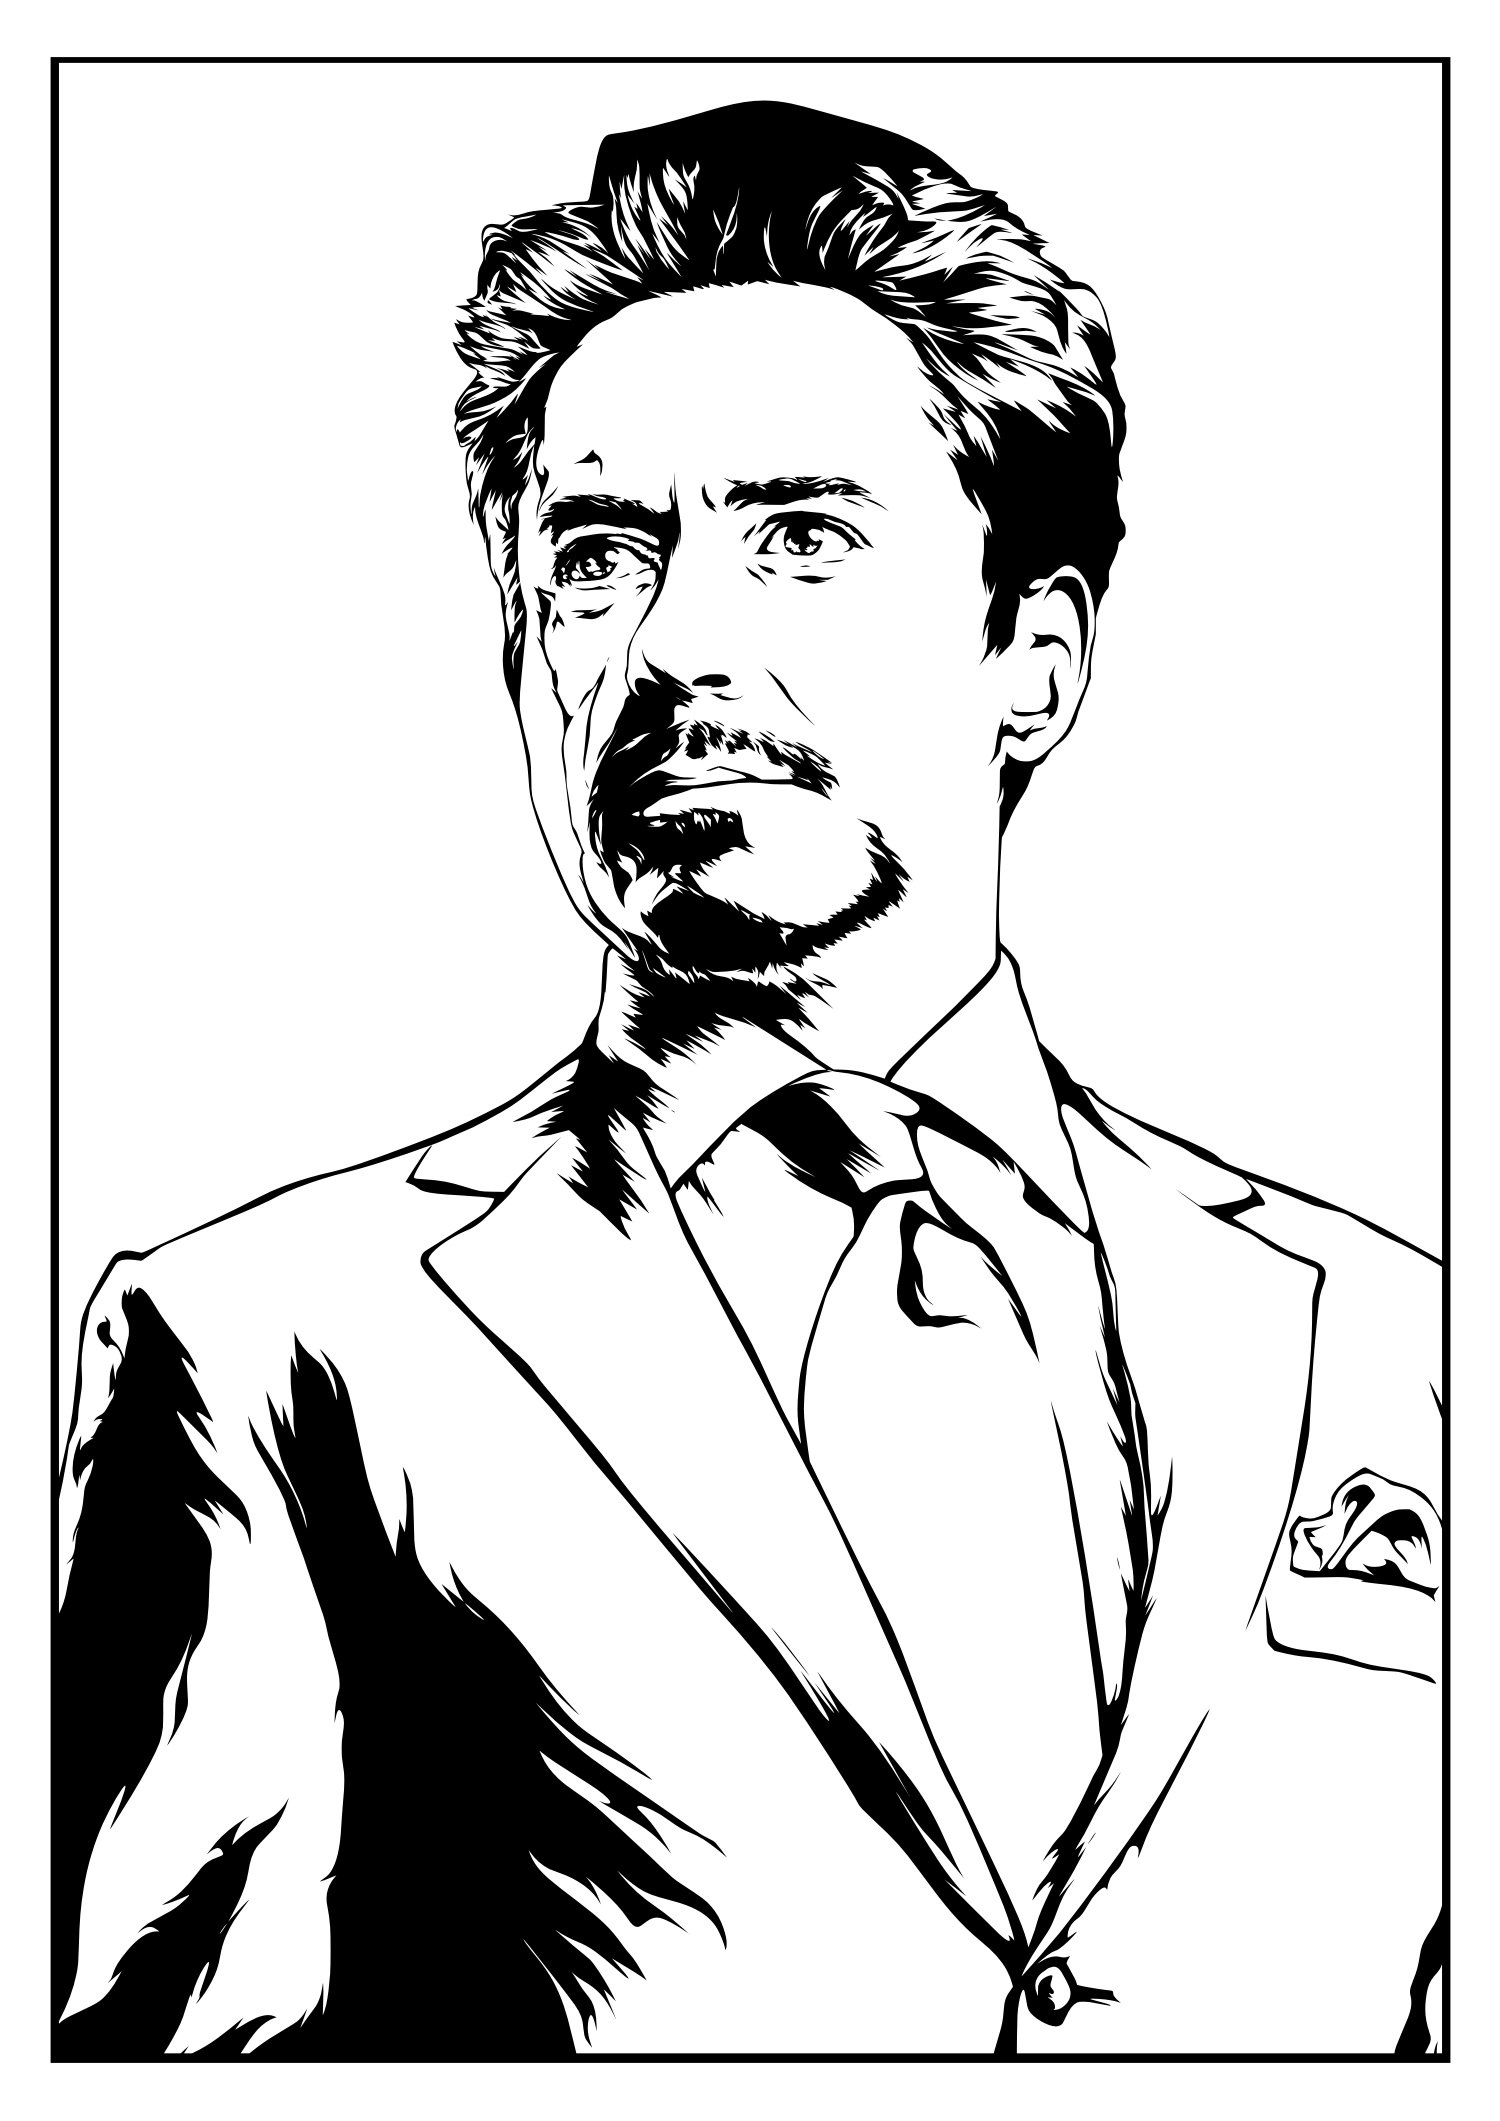 Tony Stark Free Vector cdr Download - 3axis.co